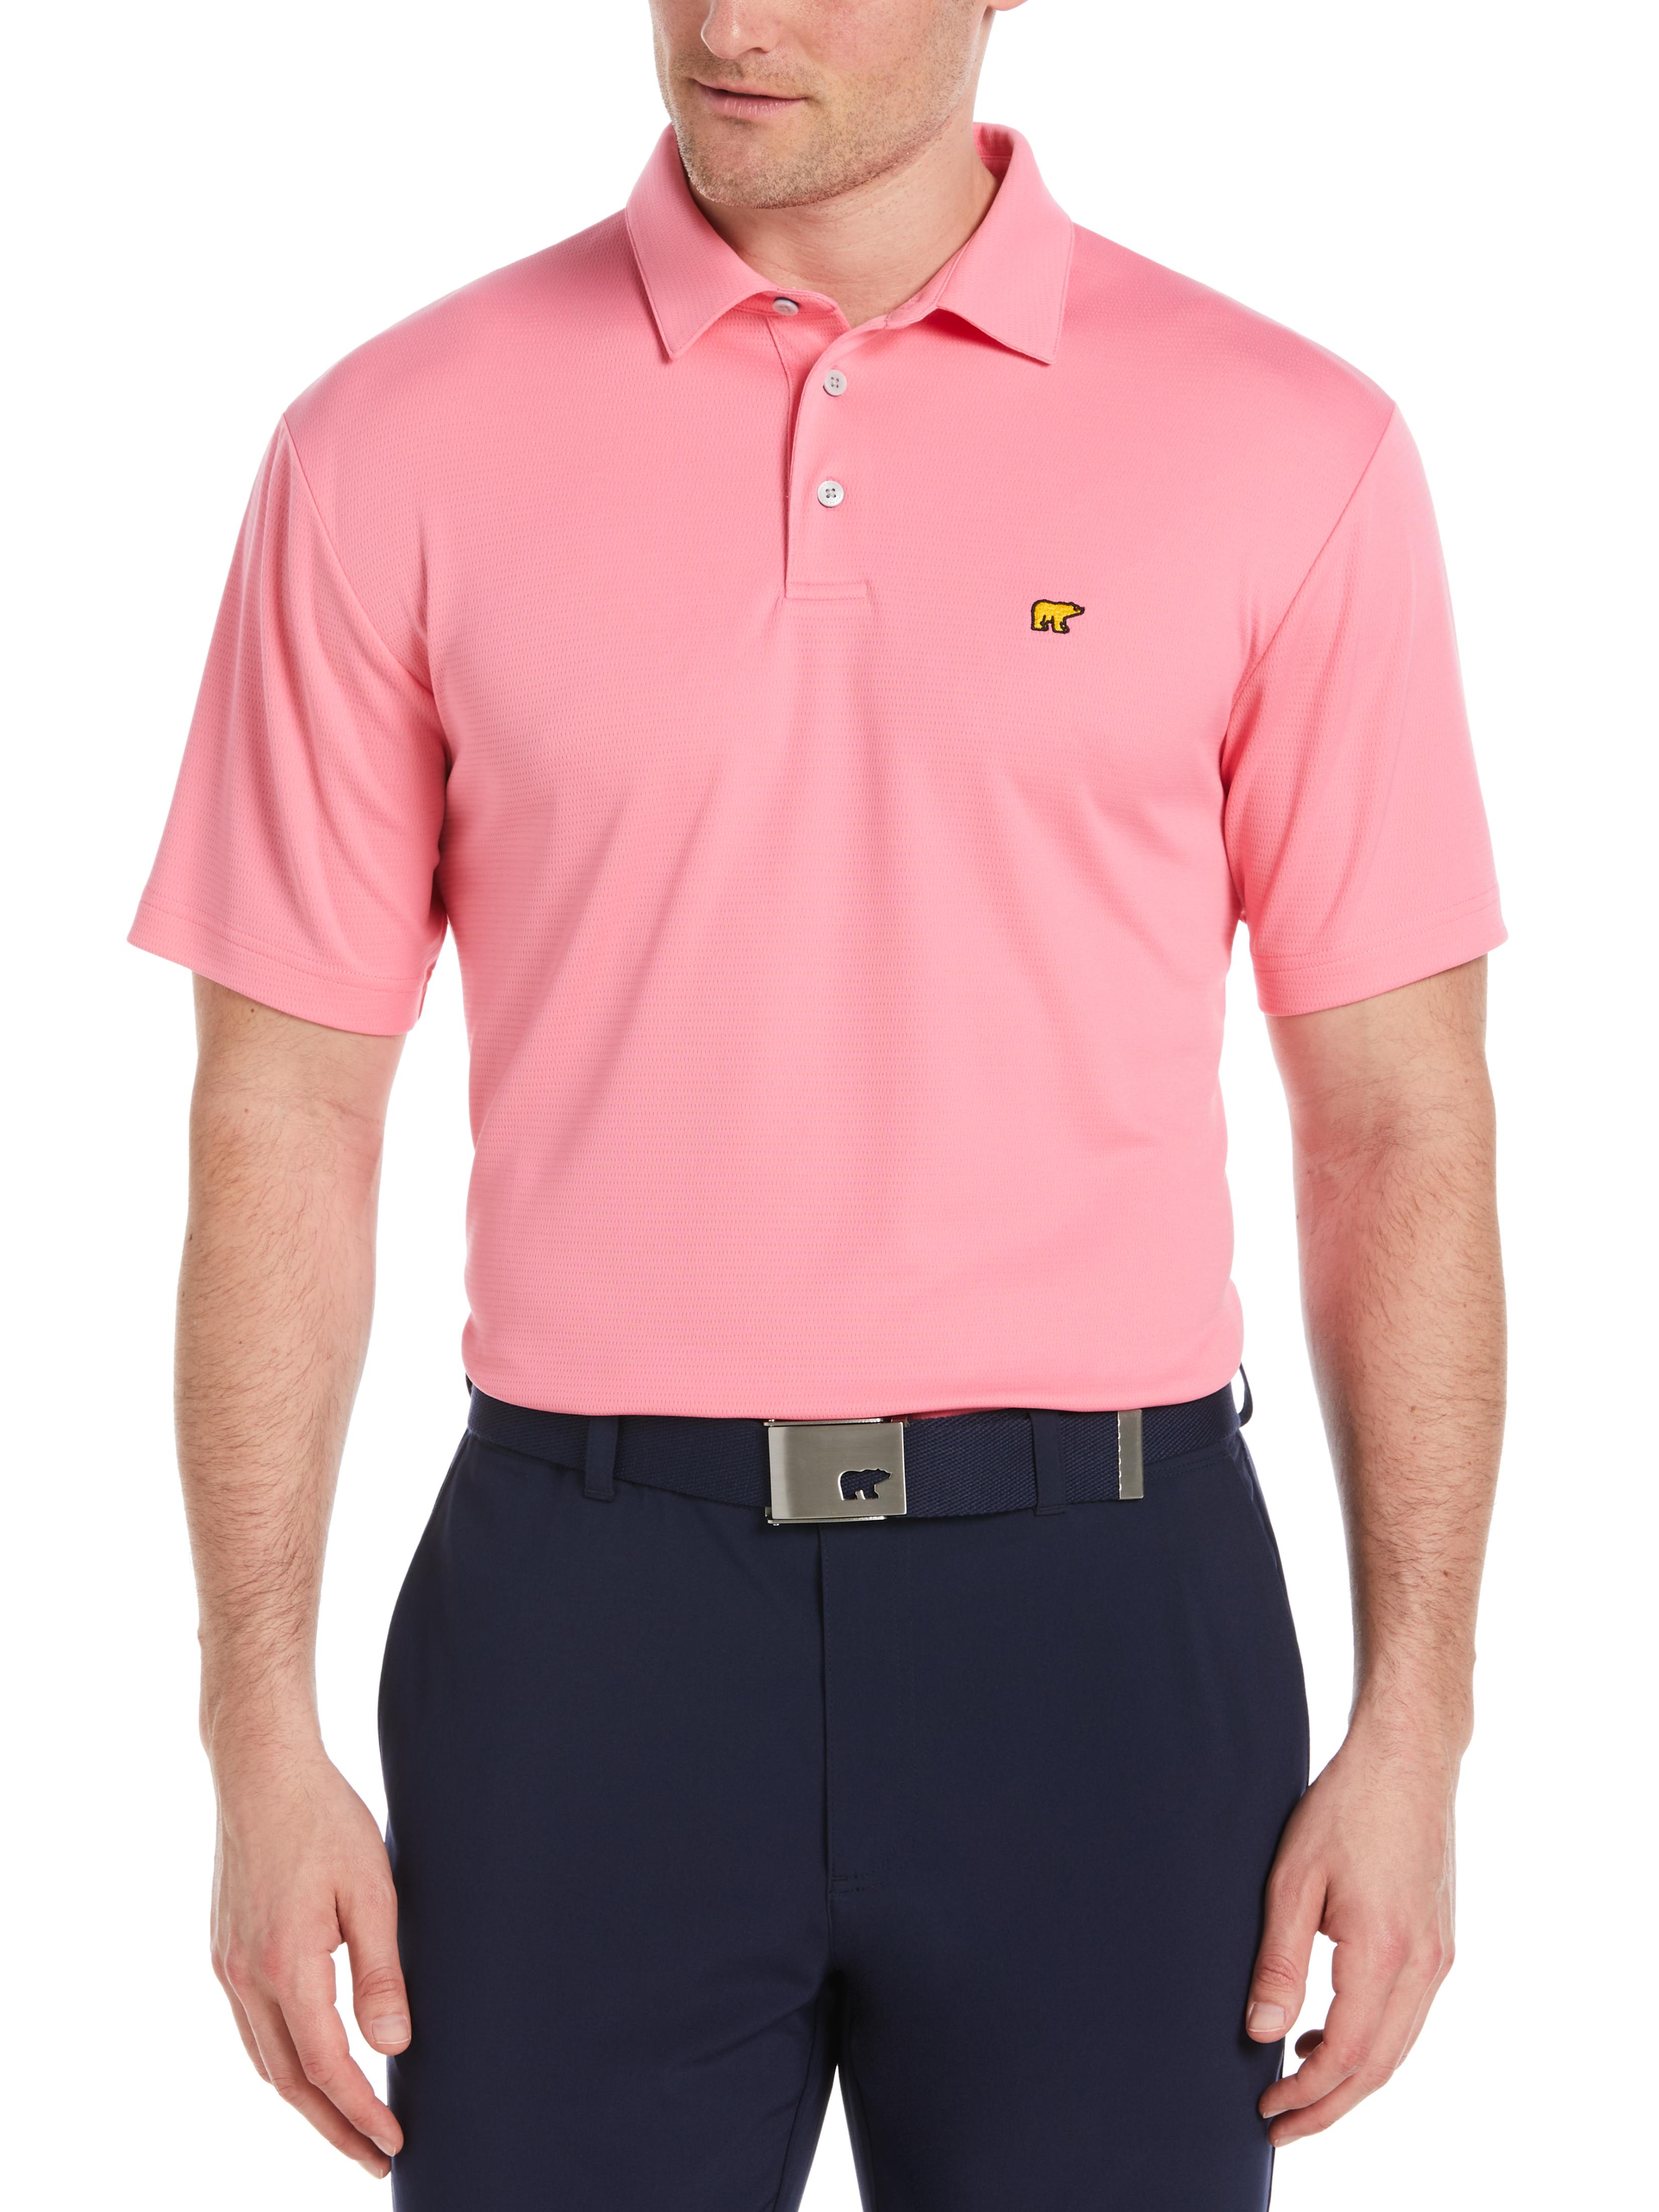 Jack Nicklaus Mens Solid Textured Golf Polo Shirt, Size Medium, Flowering Ginger Pink, 100% Polyester | Golf Apparel Shop